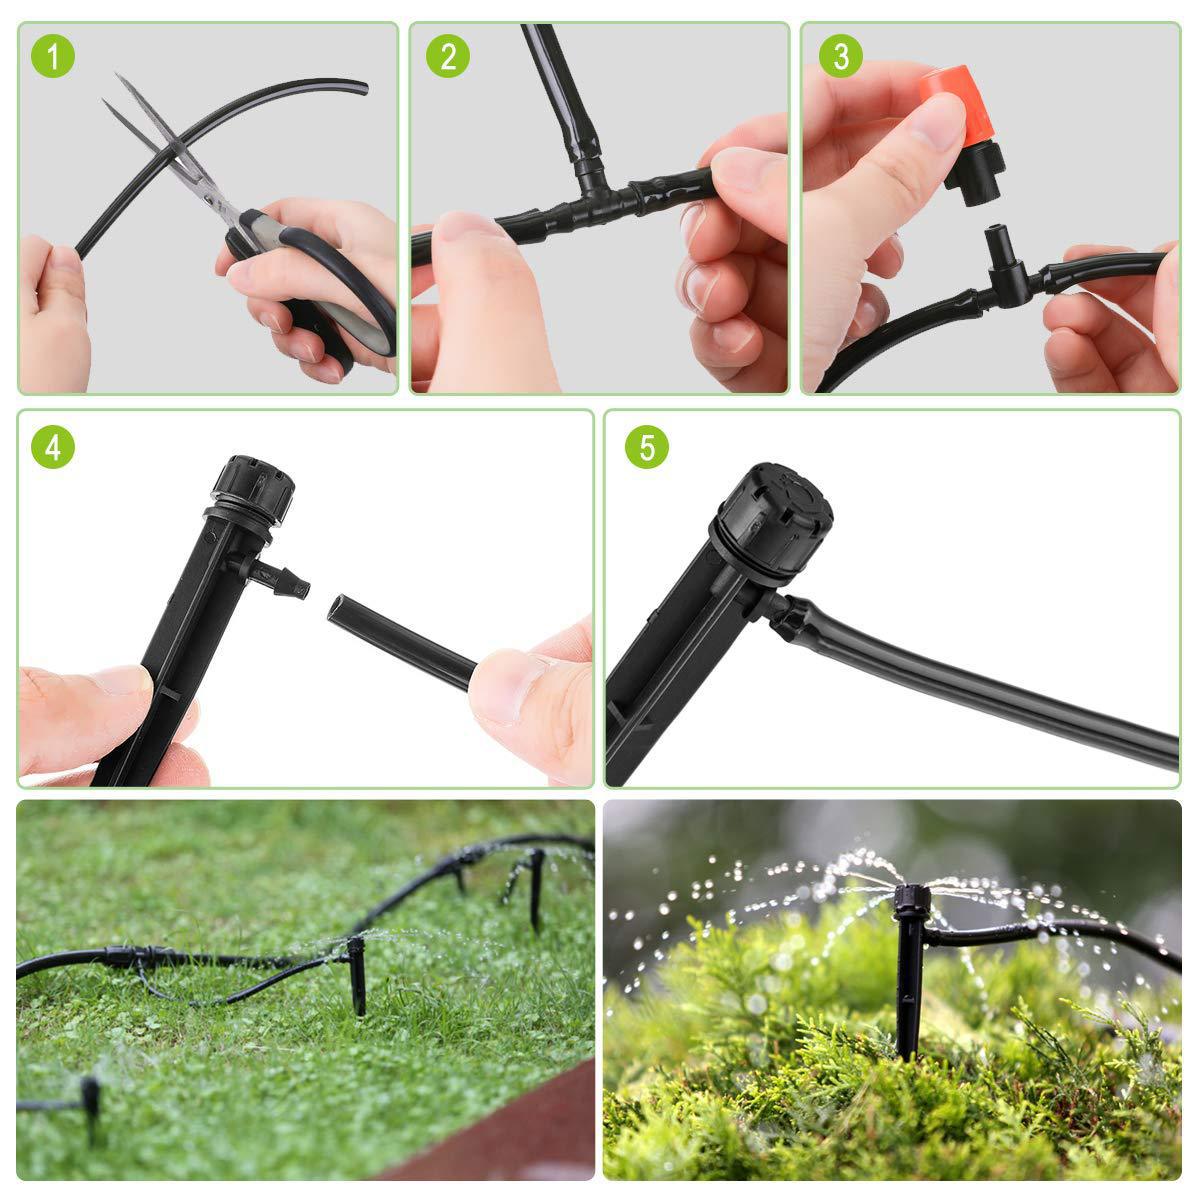 Household Automatic Watering Watering Device Garden Irrigation System DIY Potted Plant Water Permeator Drip Irrigation Kit